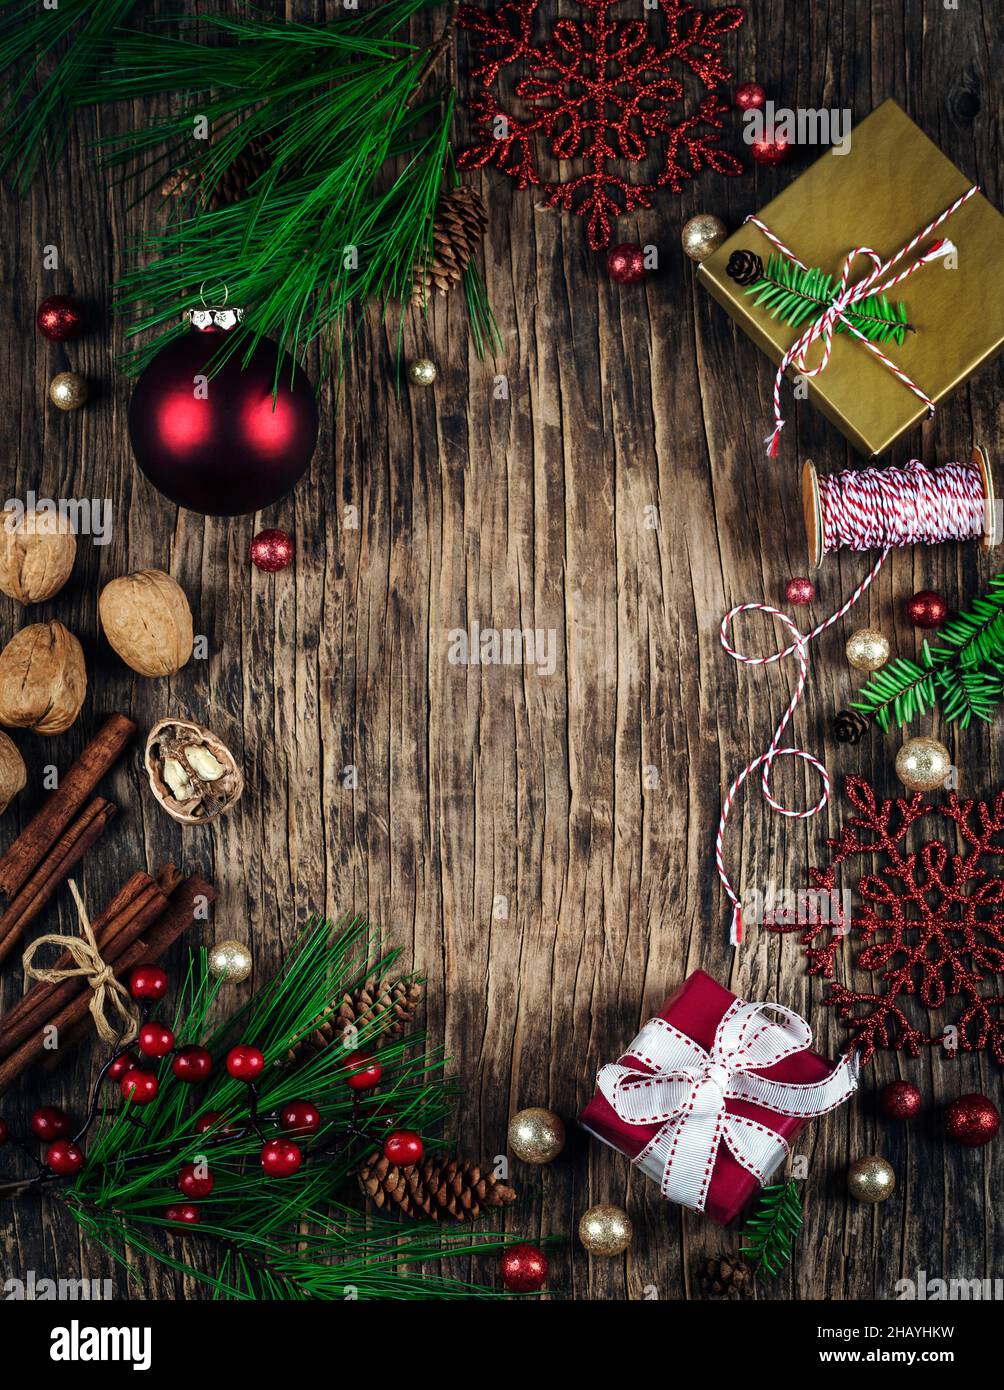 Overhead view of Christmas gifts, baubles, decorations, walnuts and cinnamon sticks on a wooden table Stock Photo